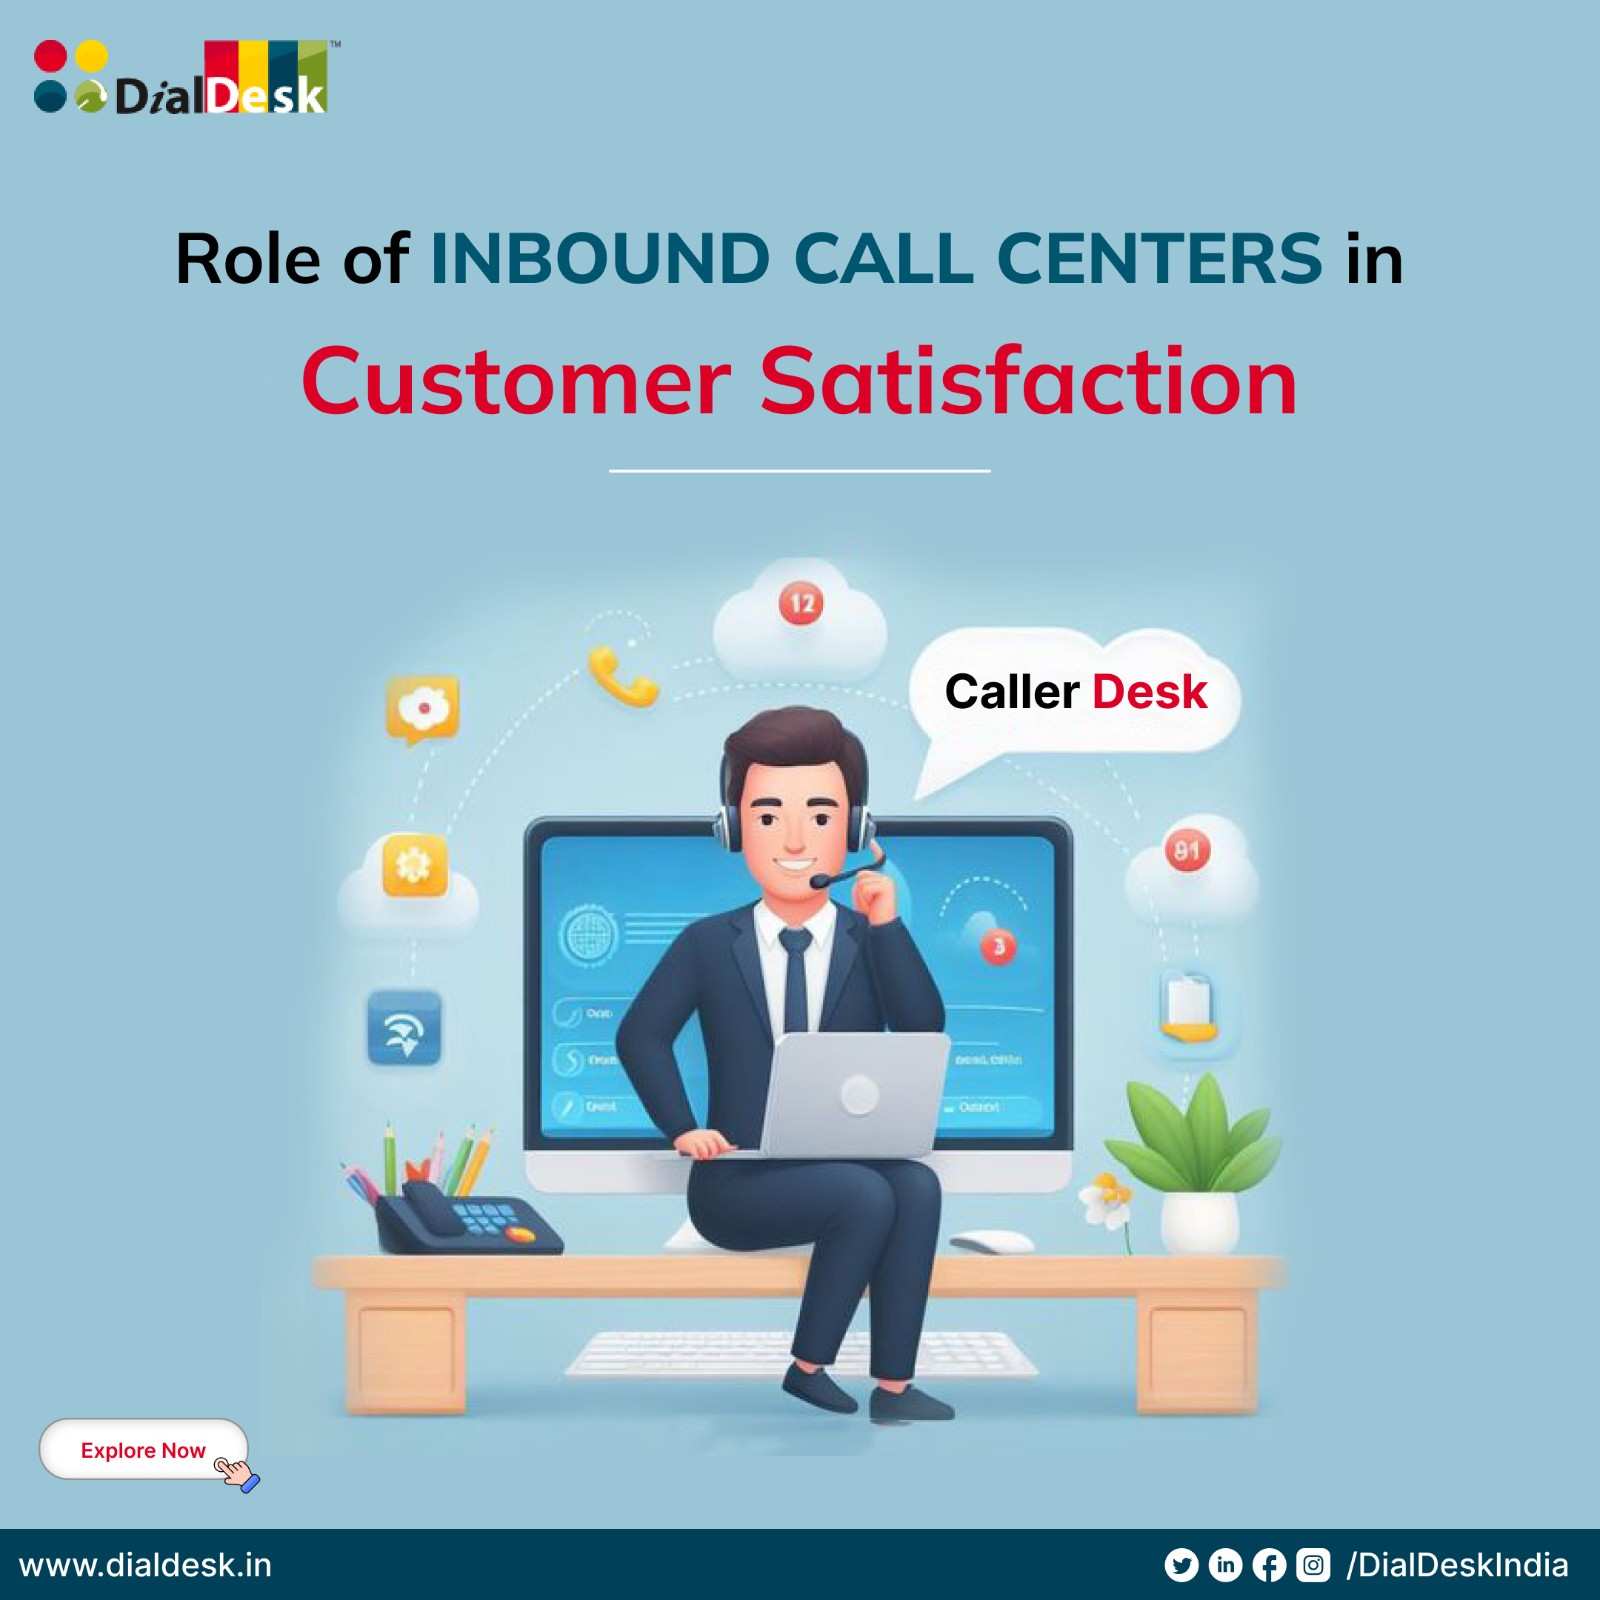 Role of Inbound Call Centers in Customer Satisfaction